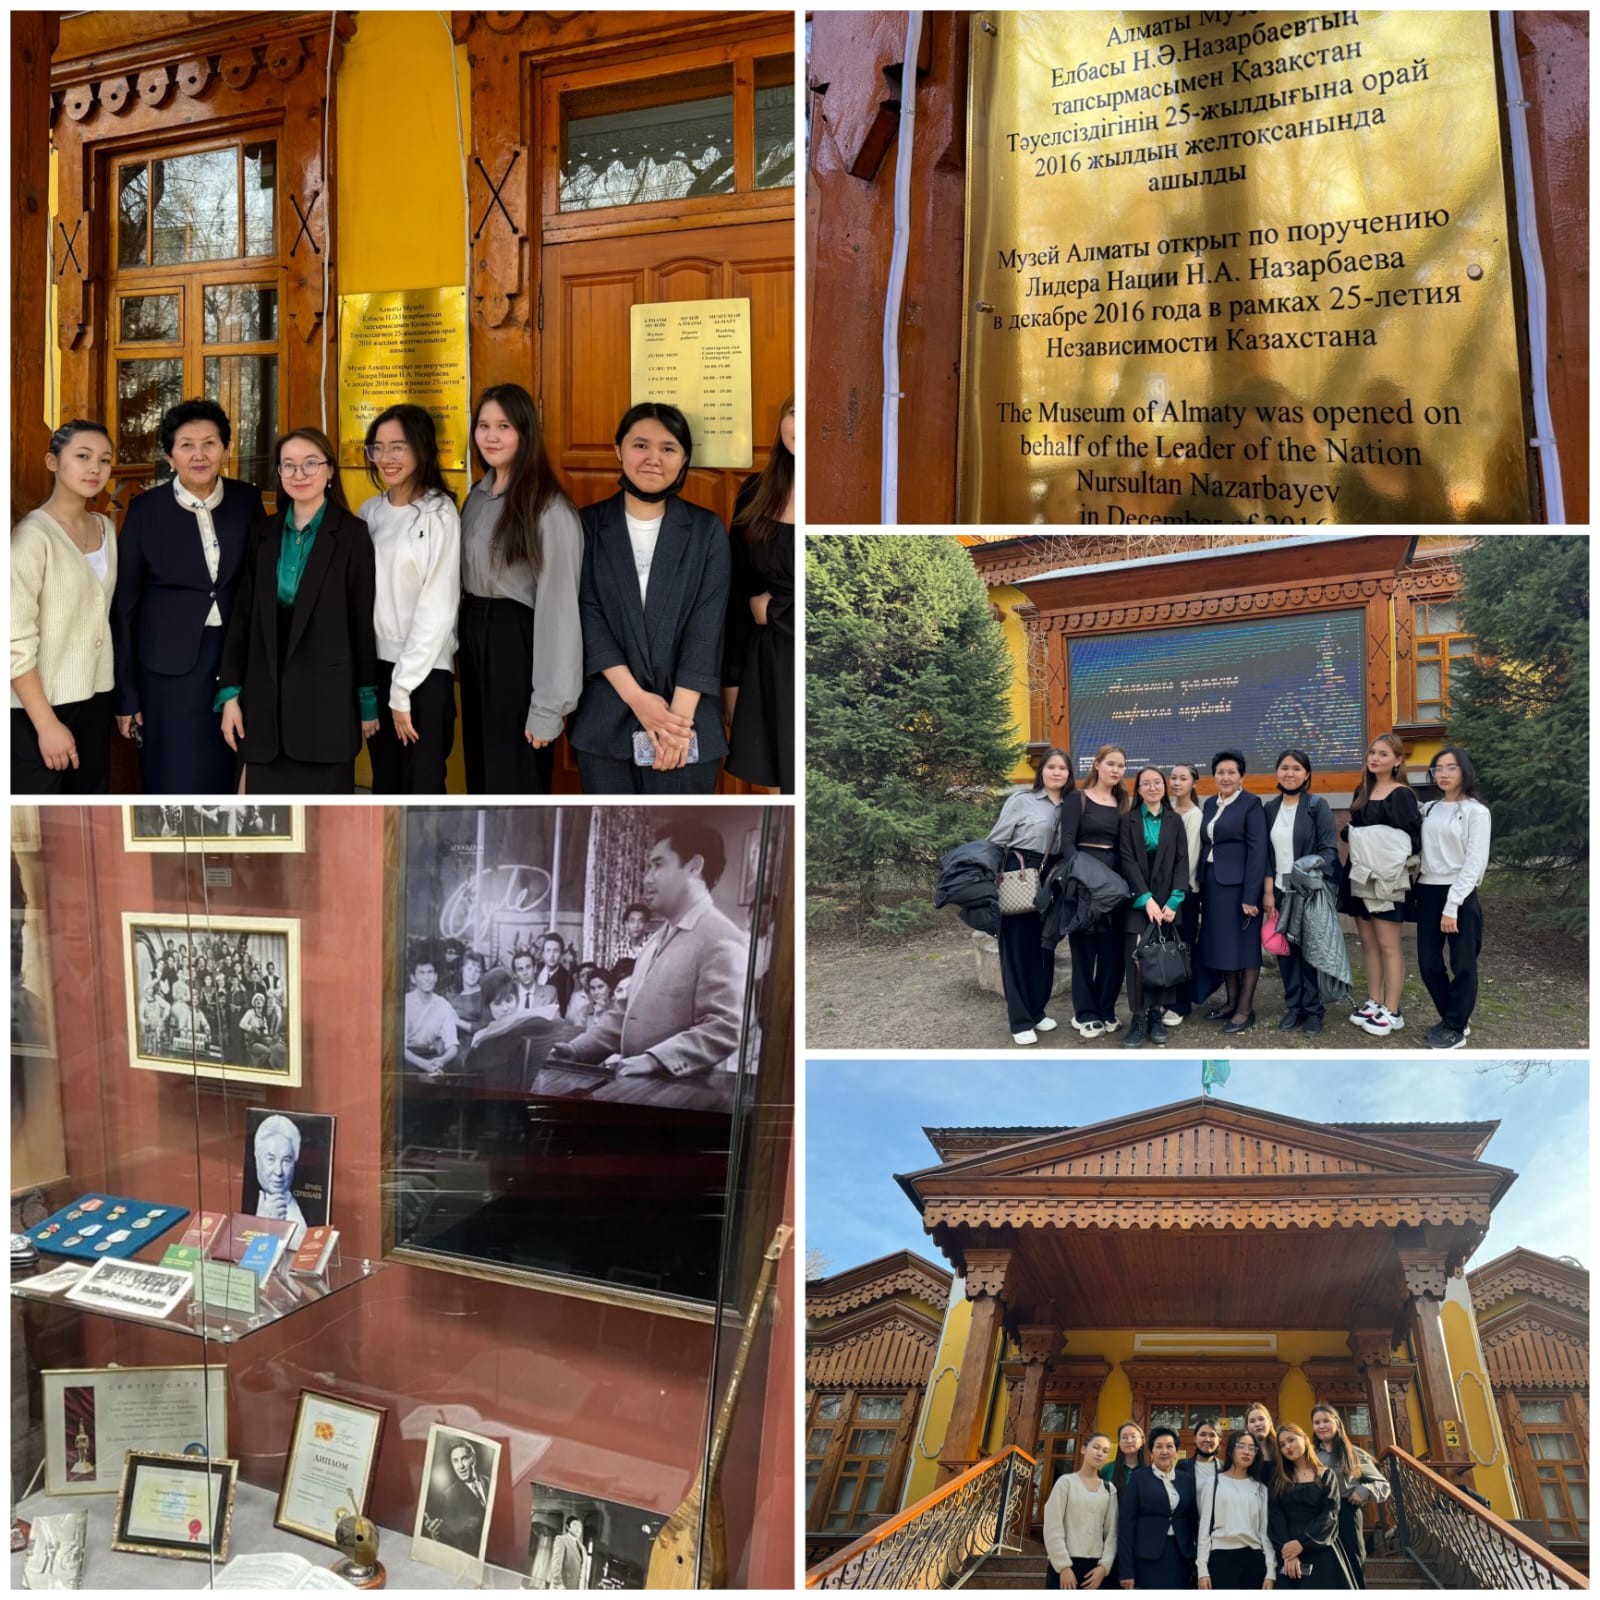 Excursion to the Museum of the History of Almaty